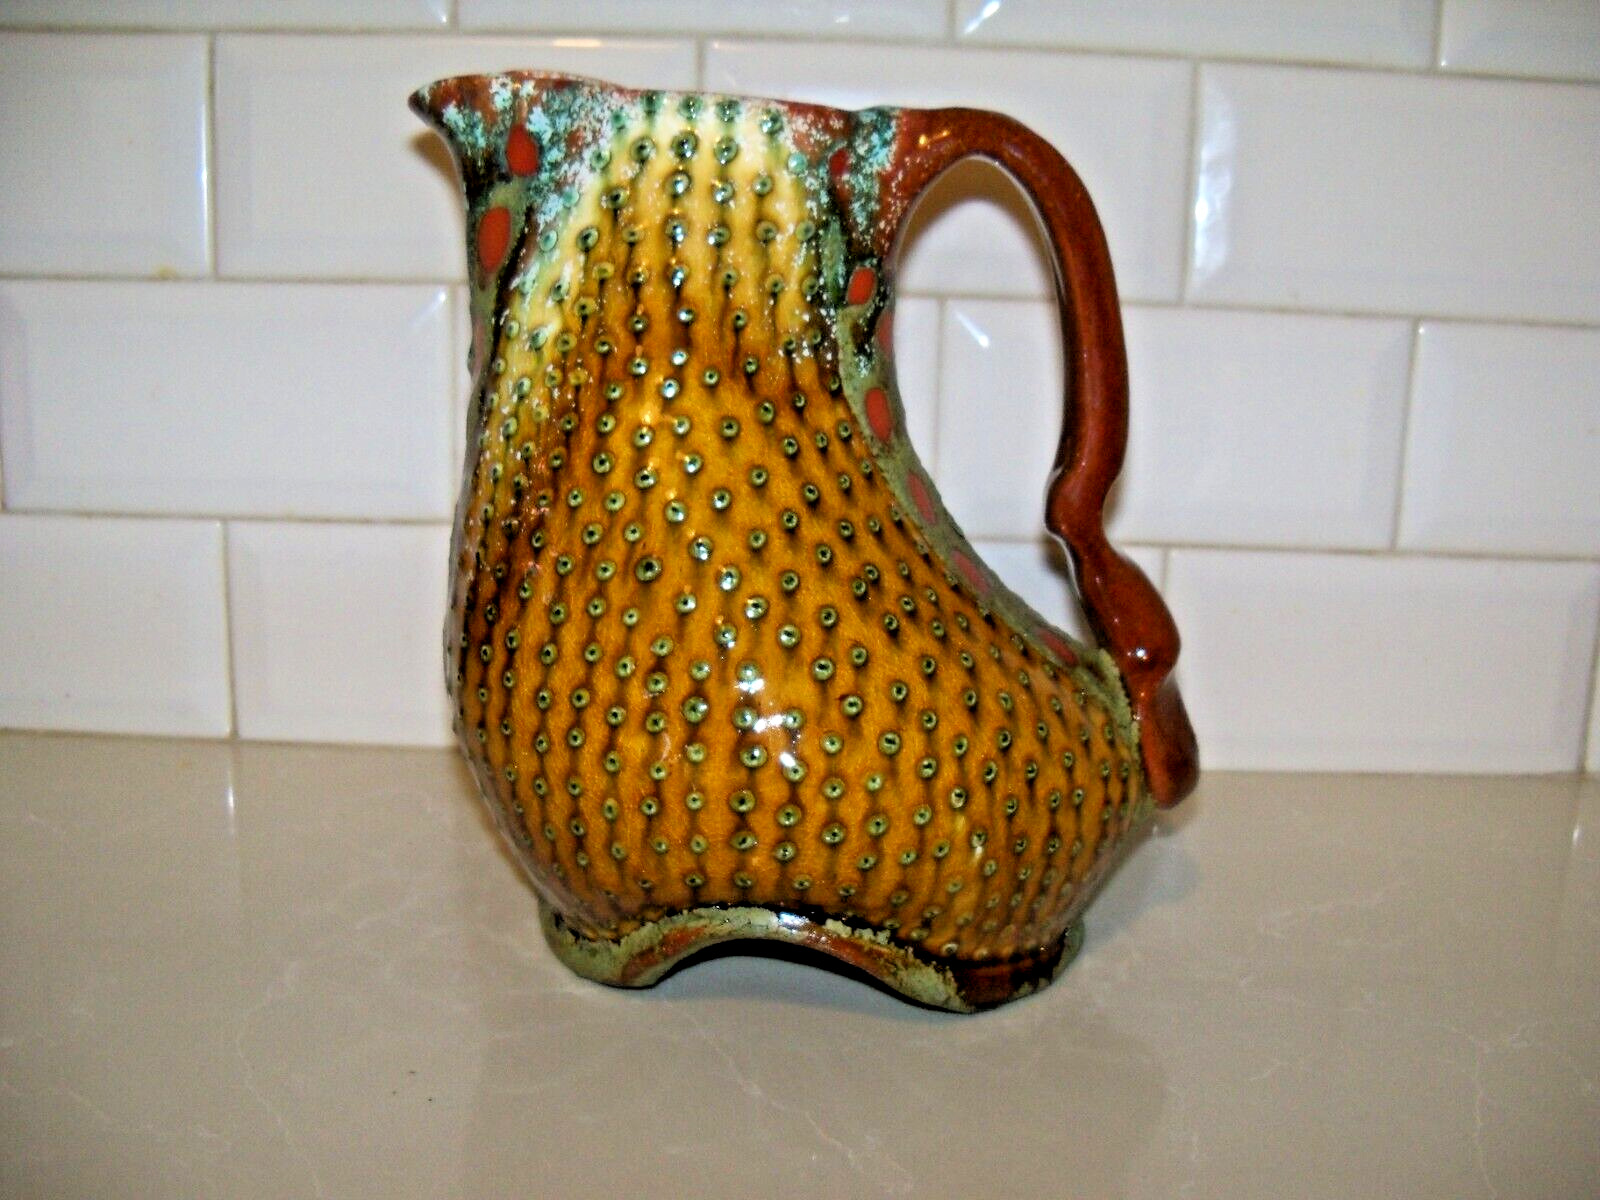 Ronan Kyle Peterson Earthenware Pitcher Pottery Nine Toes Pottery Signed